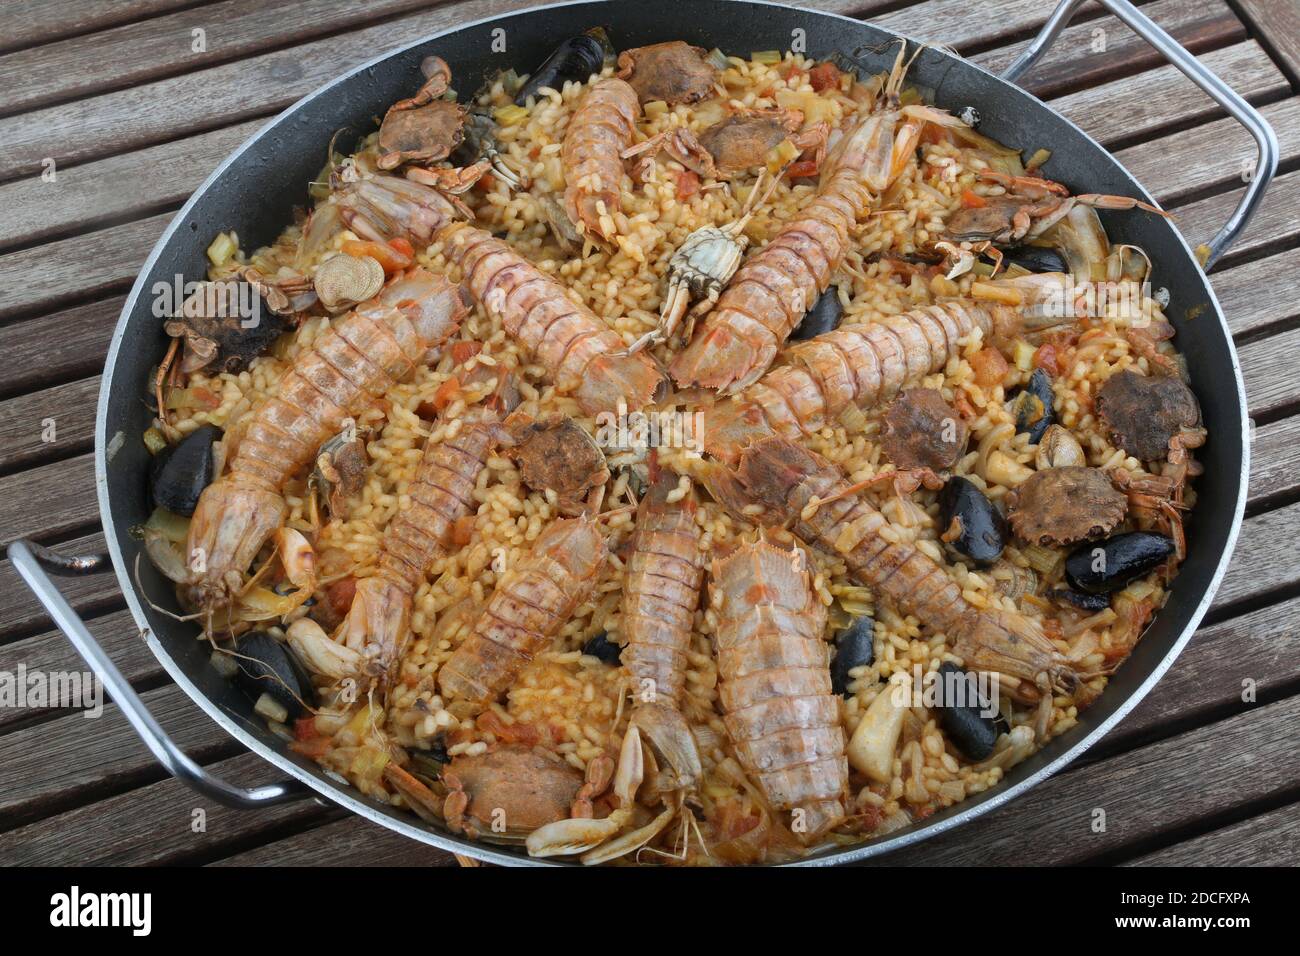 seafood rice with crayfish calamari and mussels typical spain Stock Photo